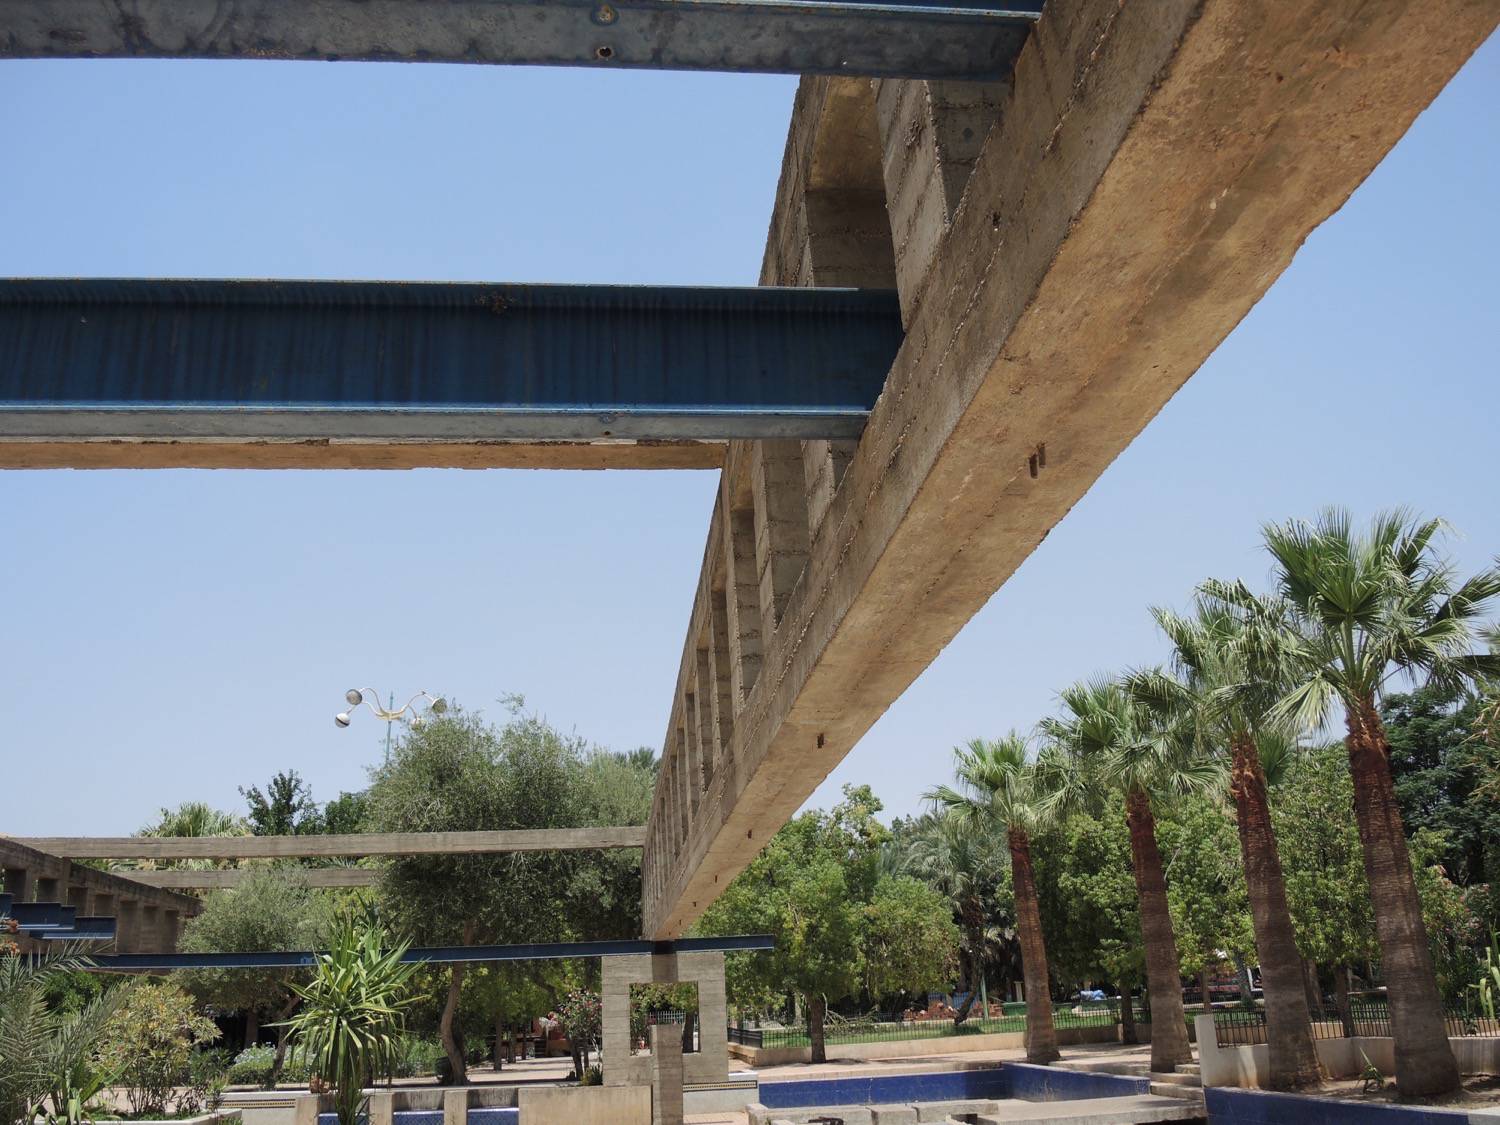 View of overhead structures in the fountain area